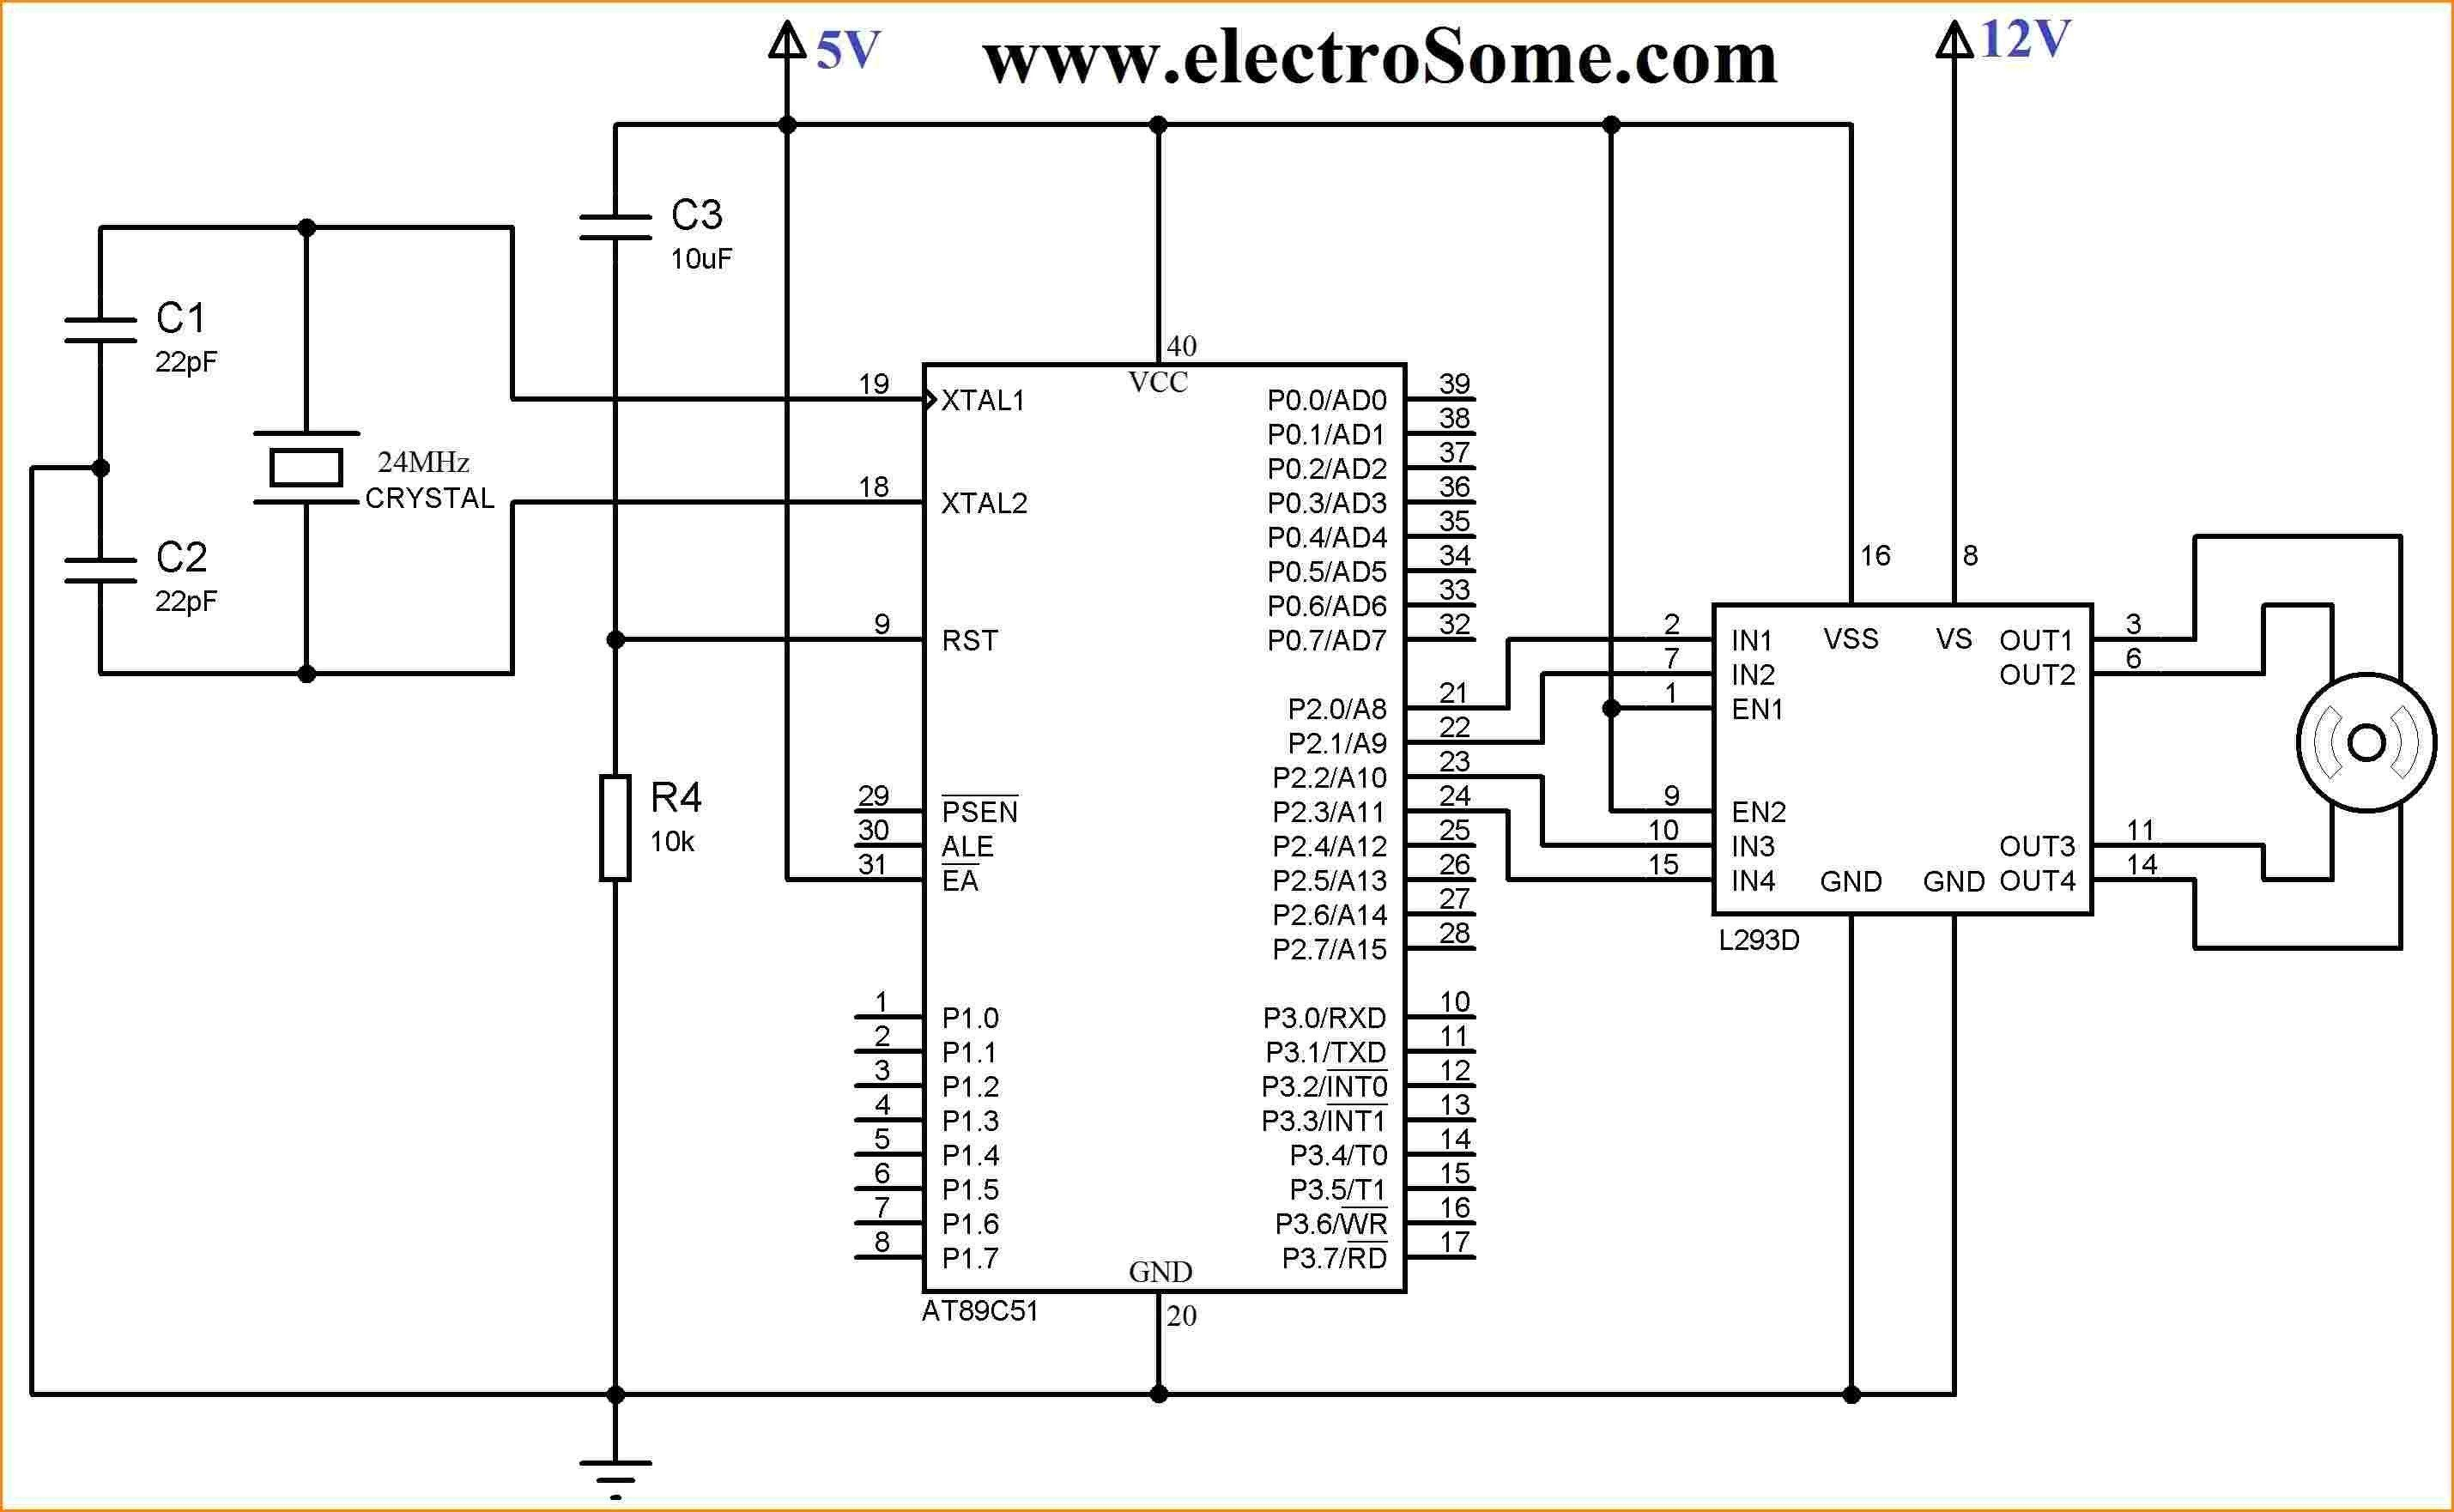 Swann Security Camera Wiring Diagram - Today Wiring Diagram - Swann Security Camera Wiring Diagram